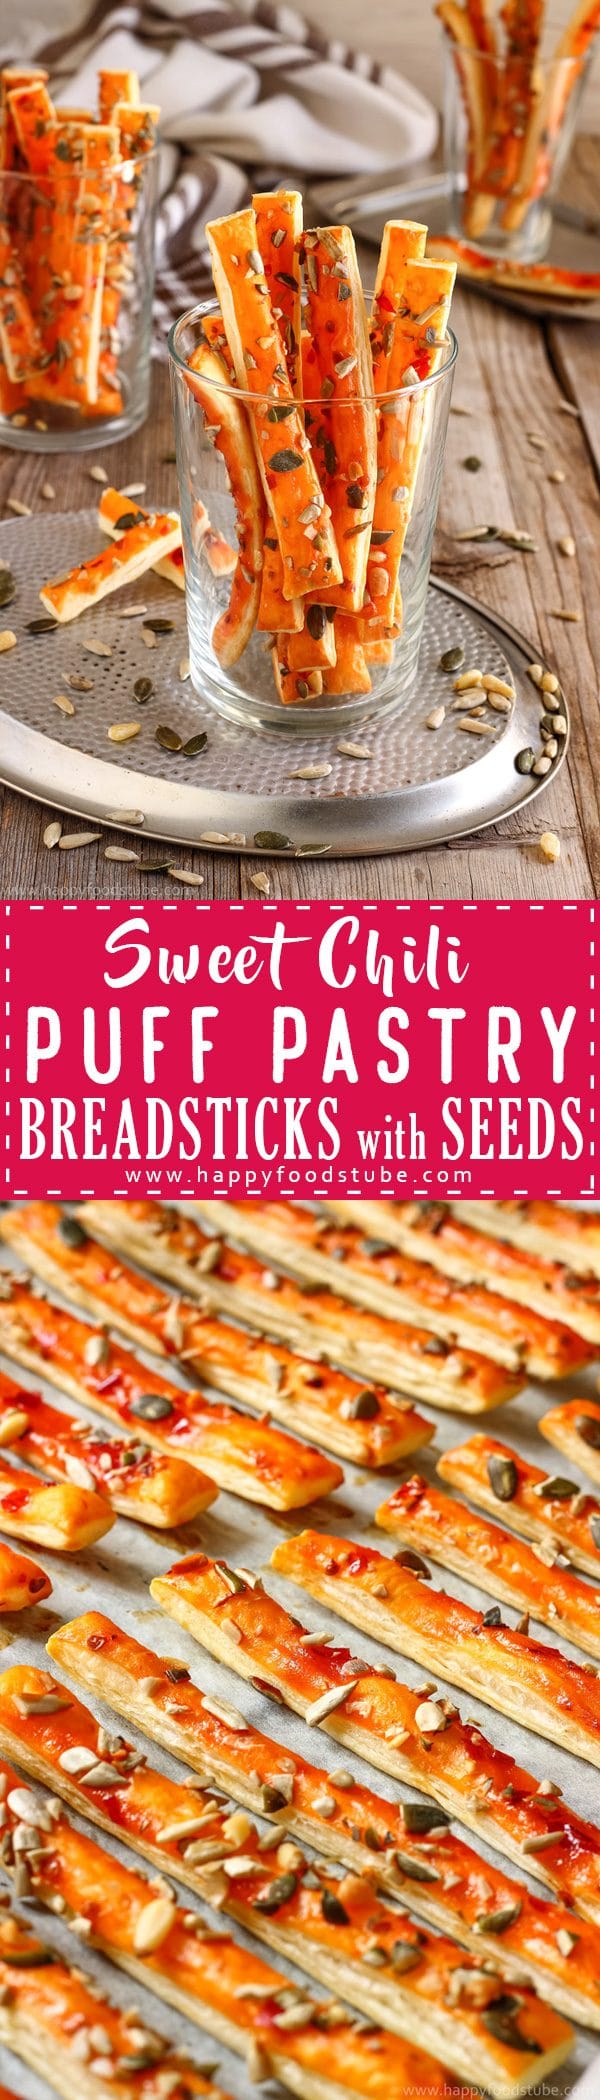 Sweet Chili Puff Pastry Breadsticks with Seeds Recipe